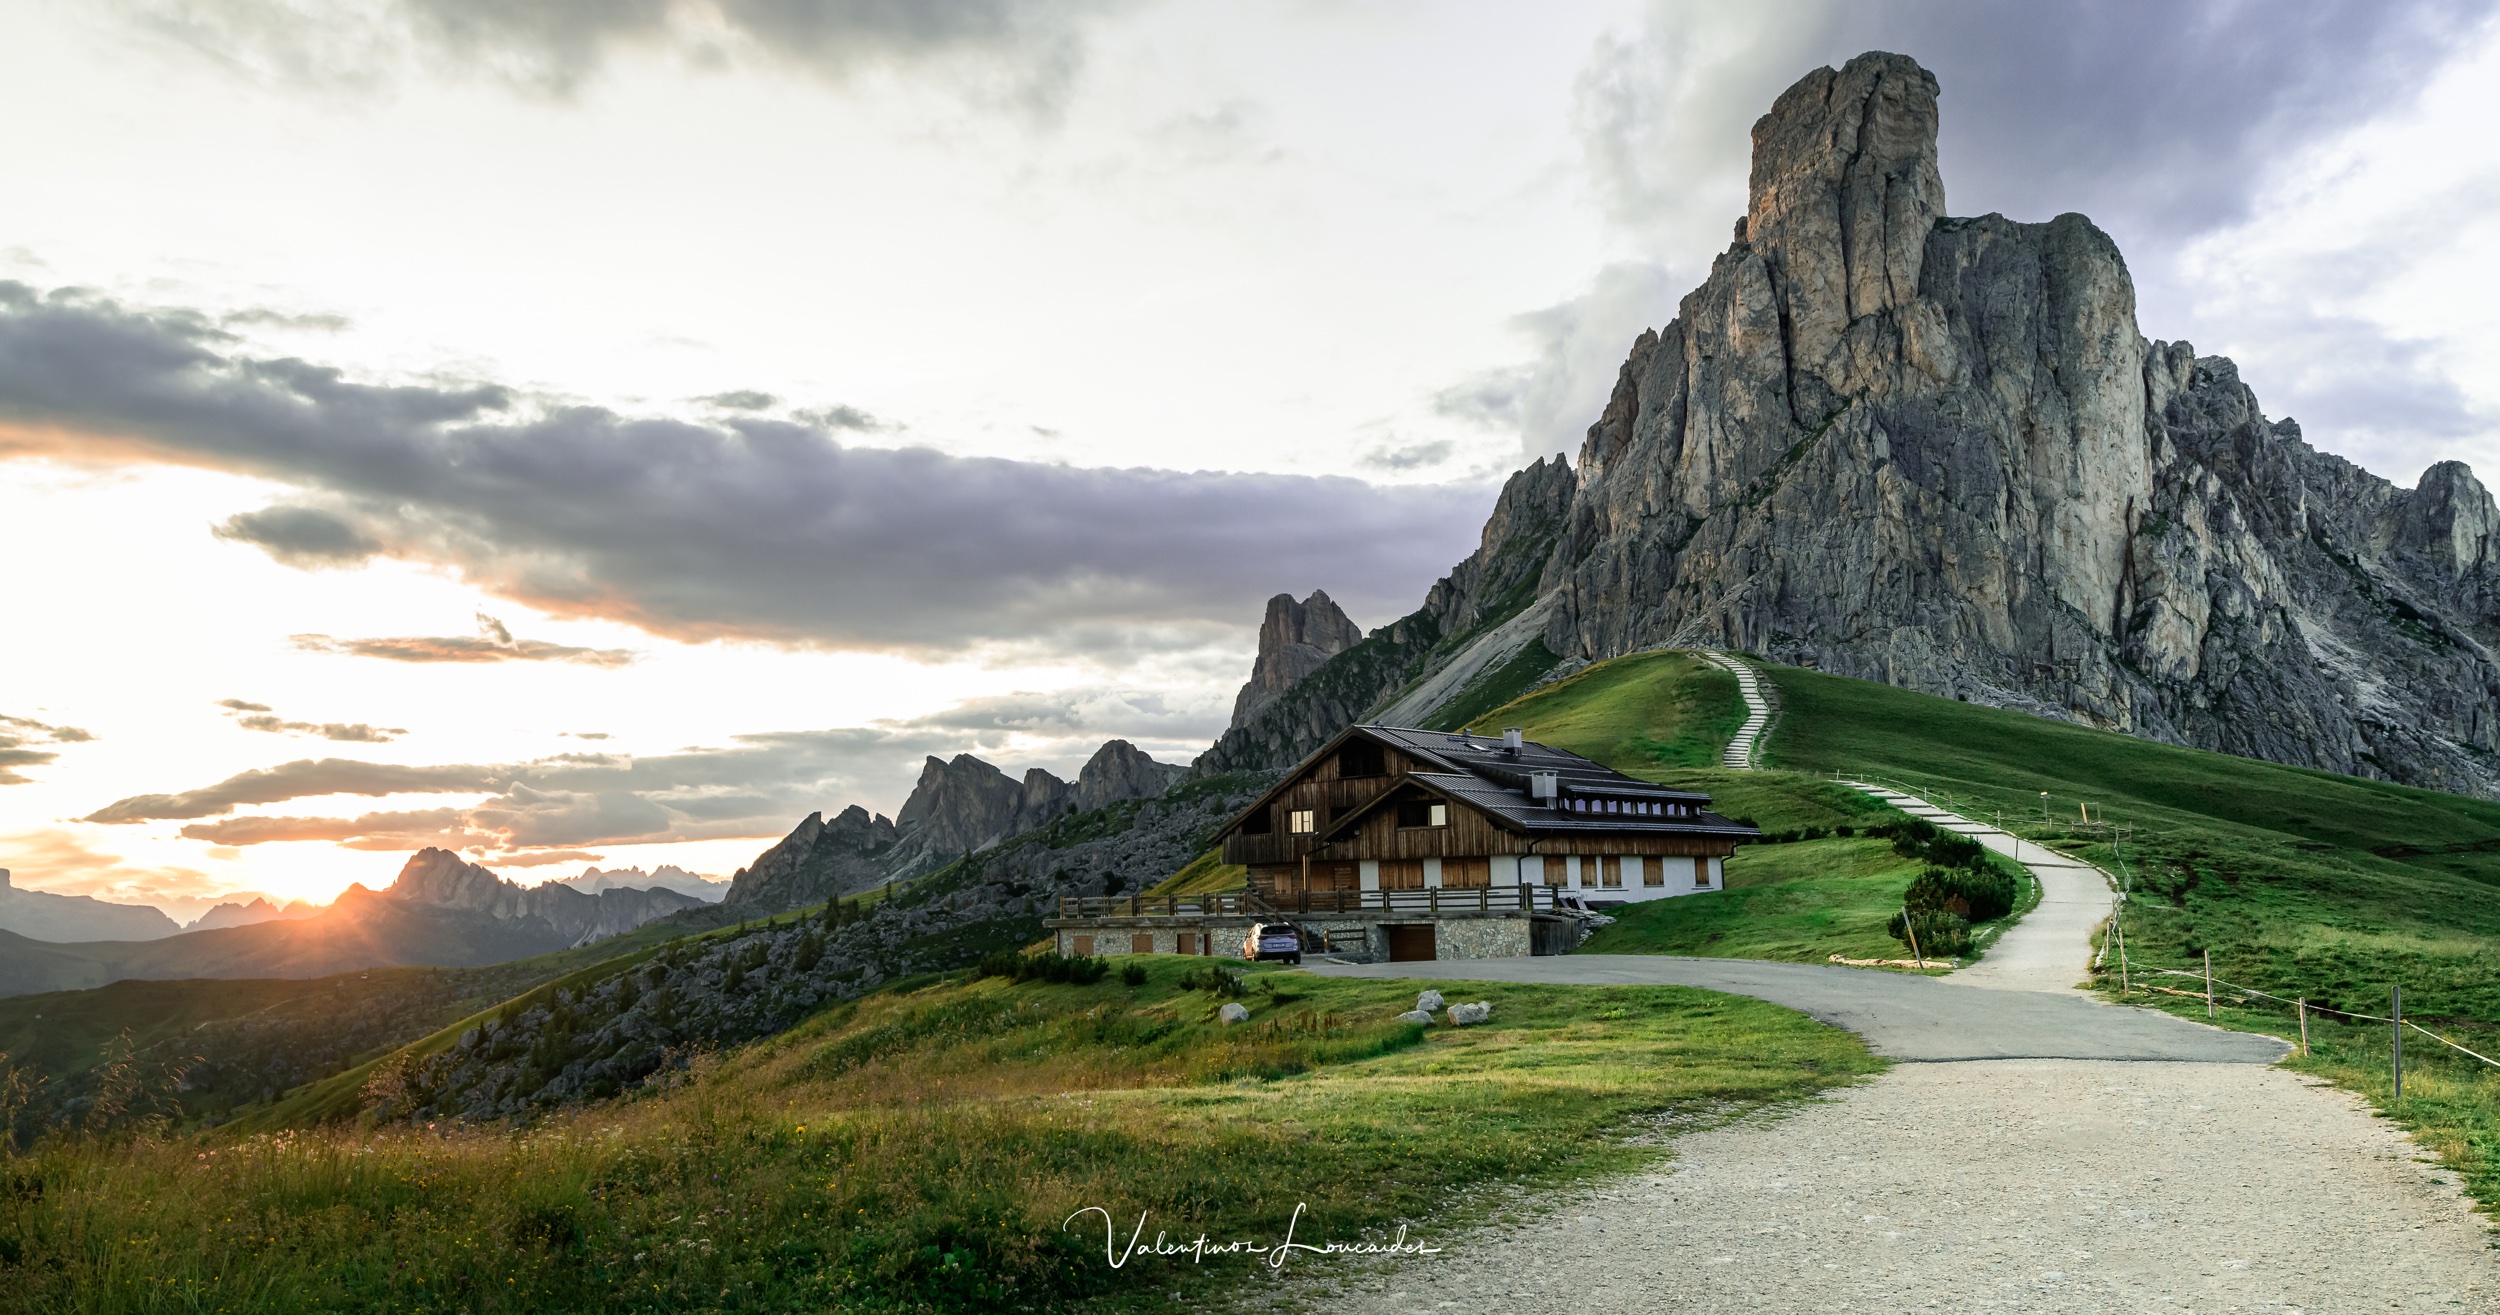 Passo Giau - Landscape Photography by Valentinos Loucaides